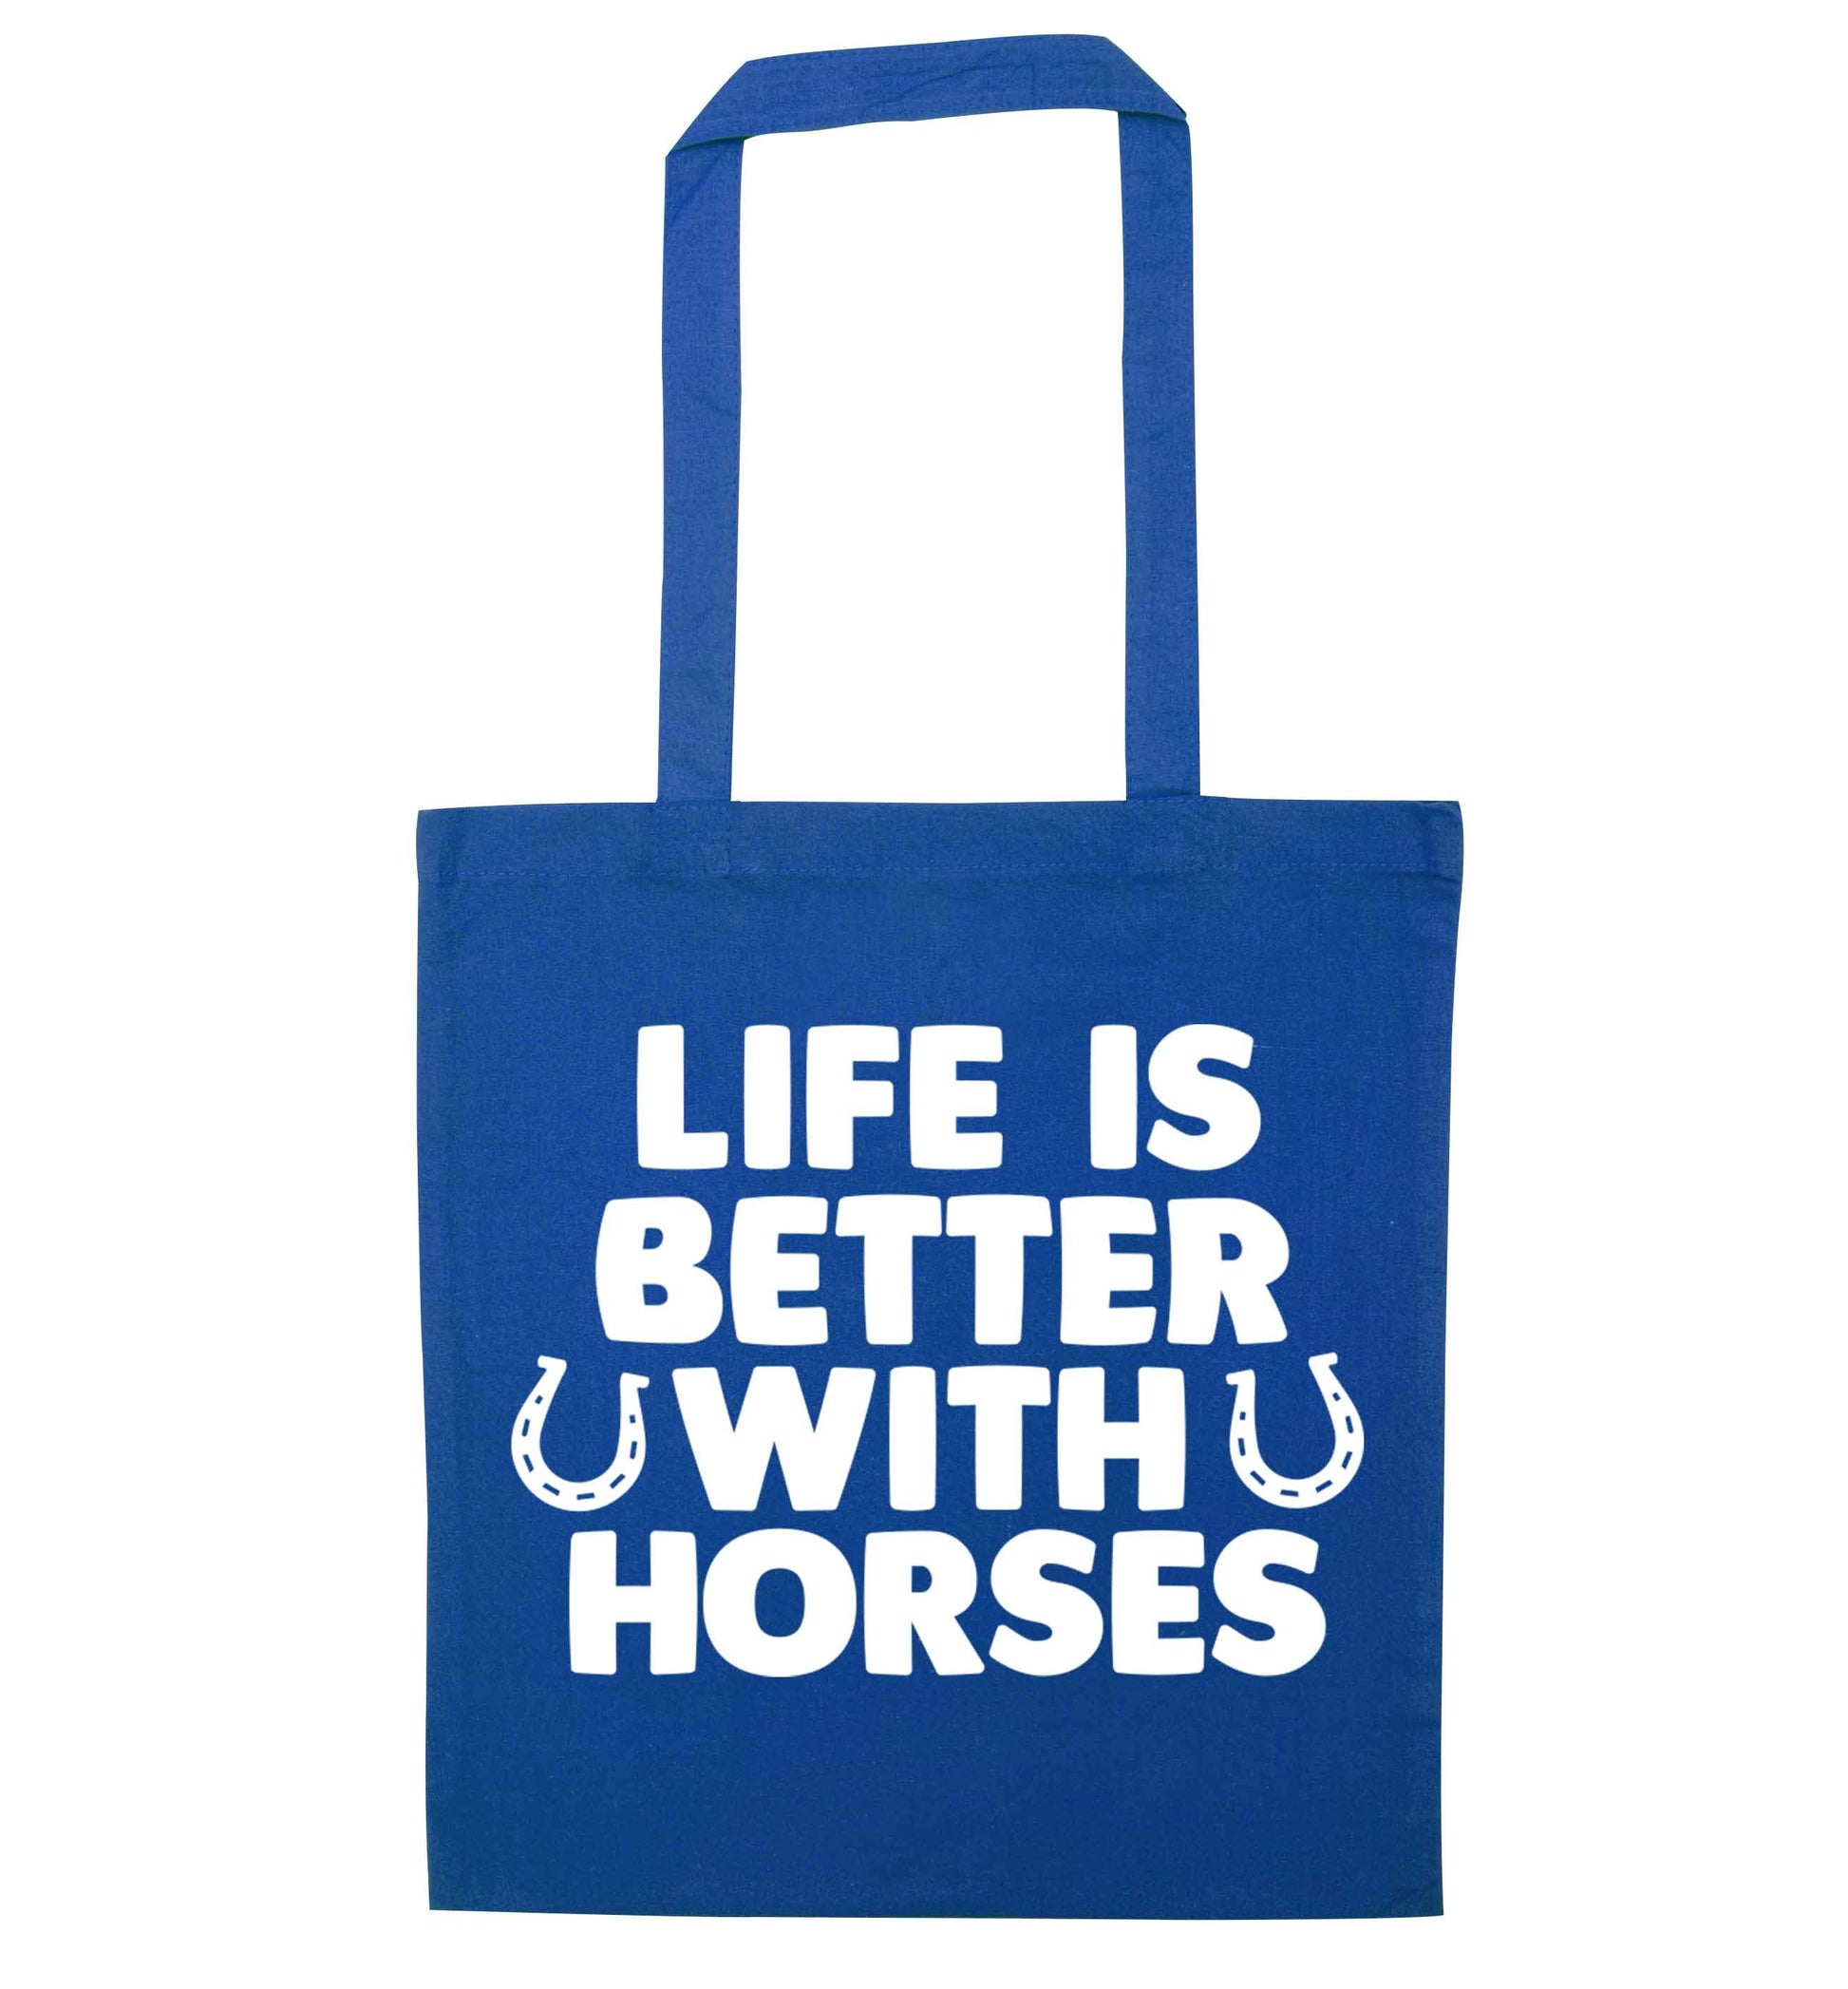 Life is better with horses blue tote bag